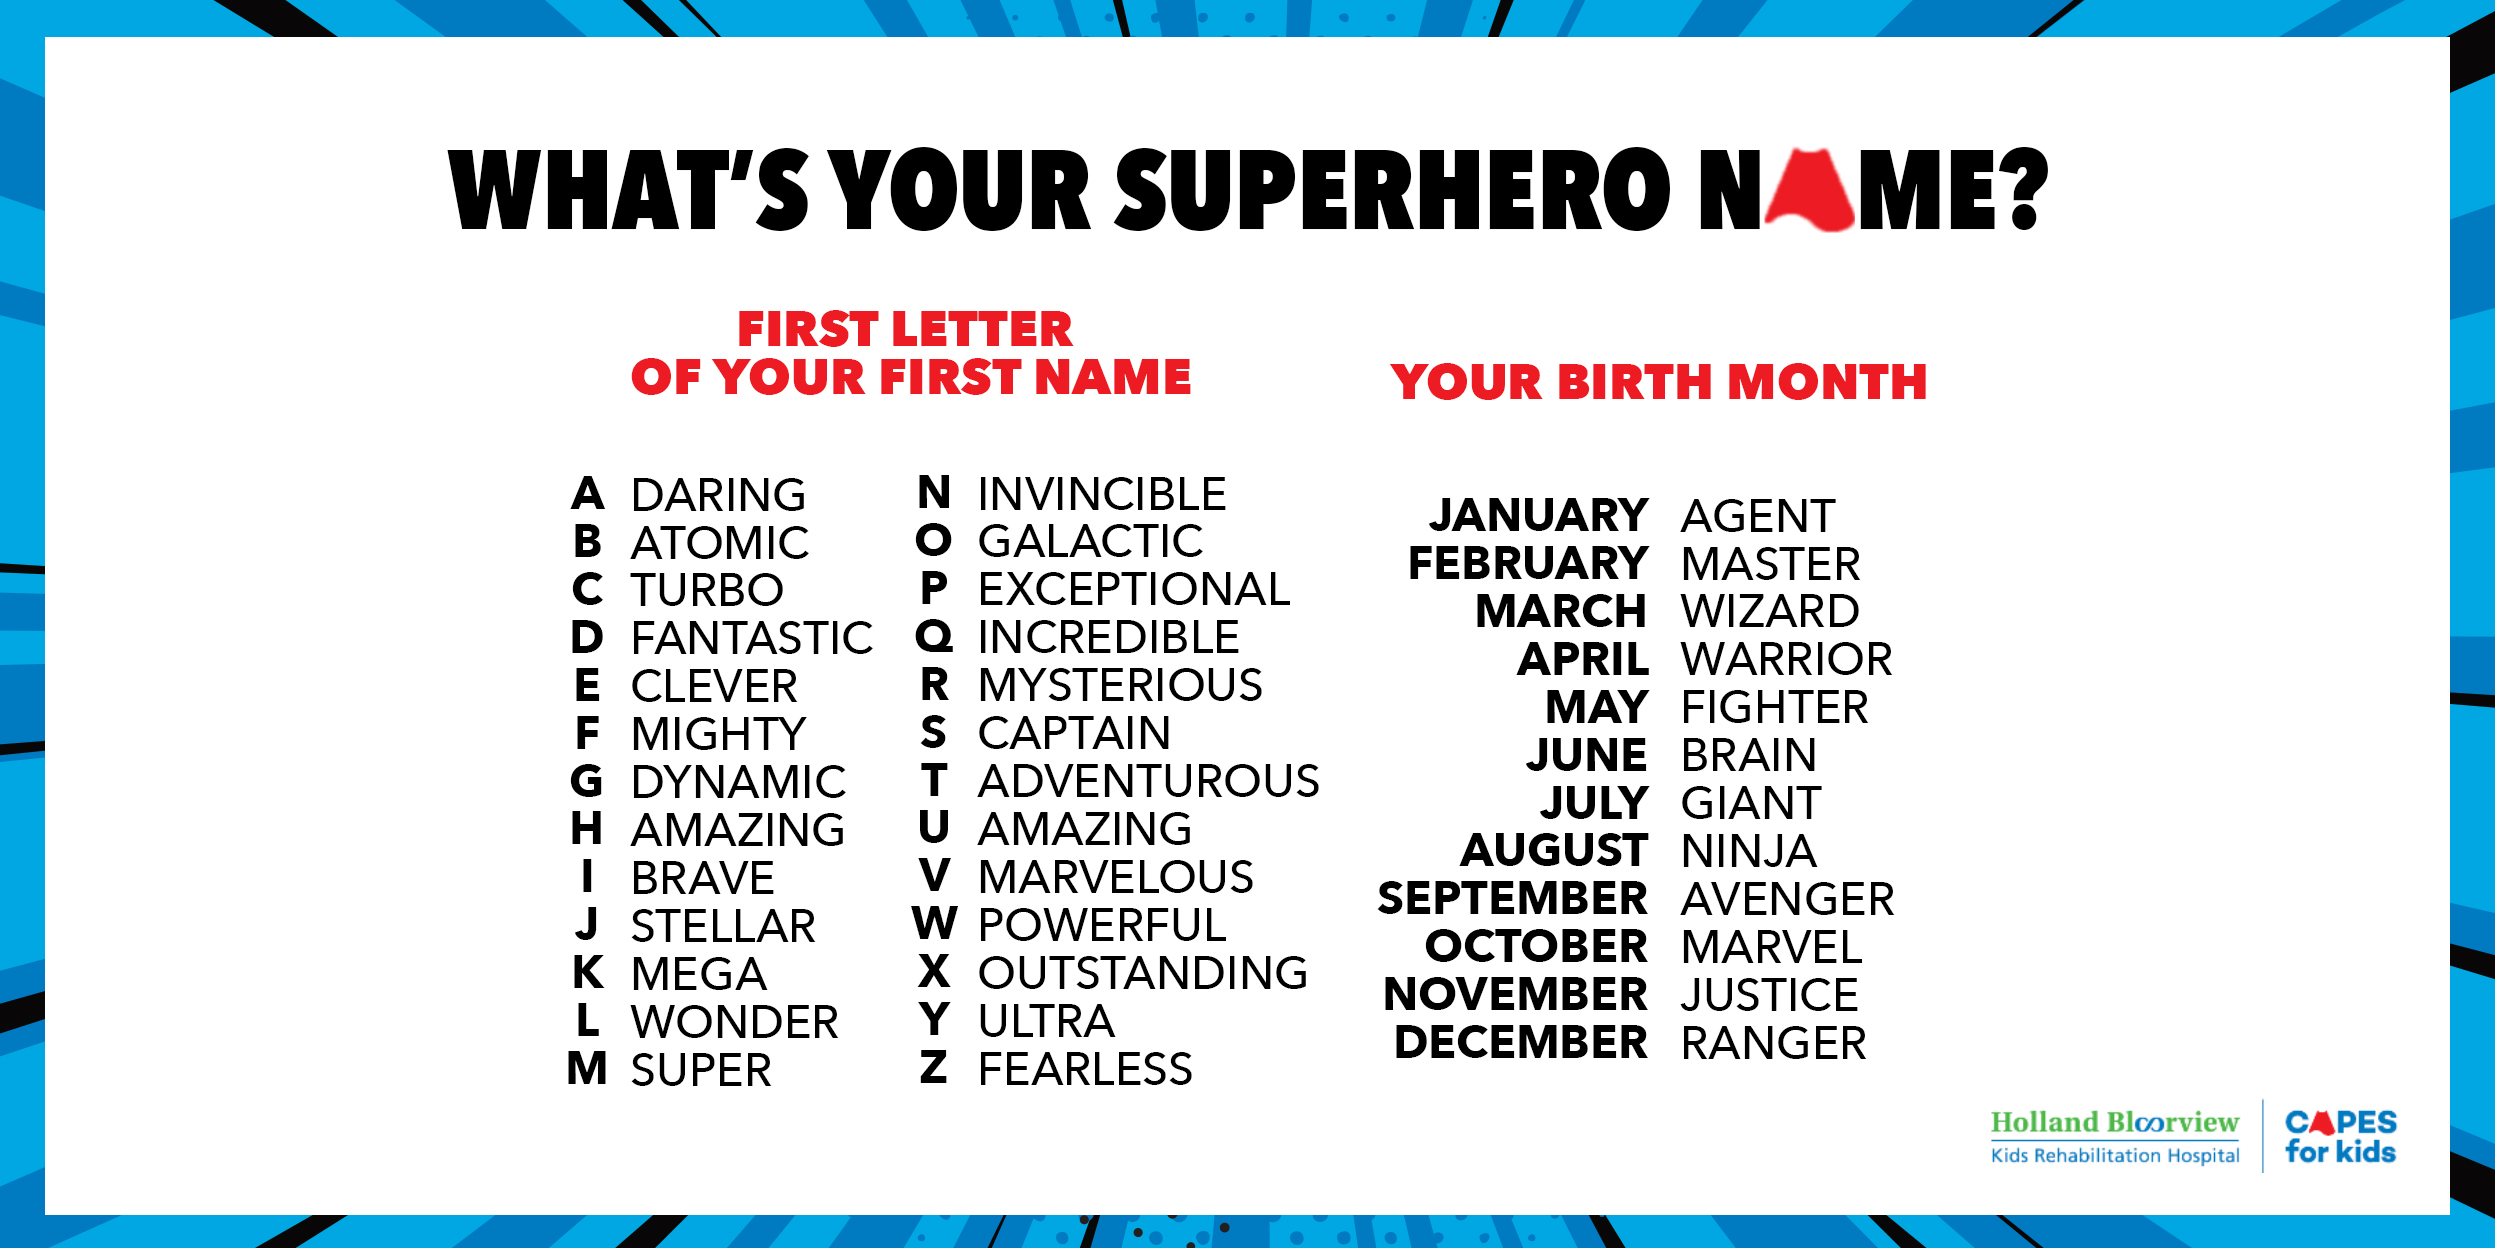 Holland Bloorview on Twitter: "What's YOUR superhero name? Find out using our name generator for #CapesForKids! 💪 Want to download an accessible document and other fun stuff? https://t.co/ZBLEPWwKhH https://t.co/IkNdLKLDHc" / Twitter